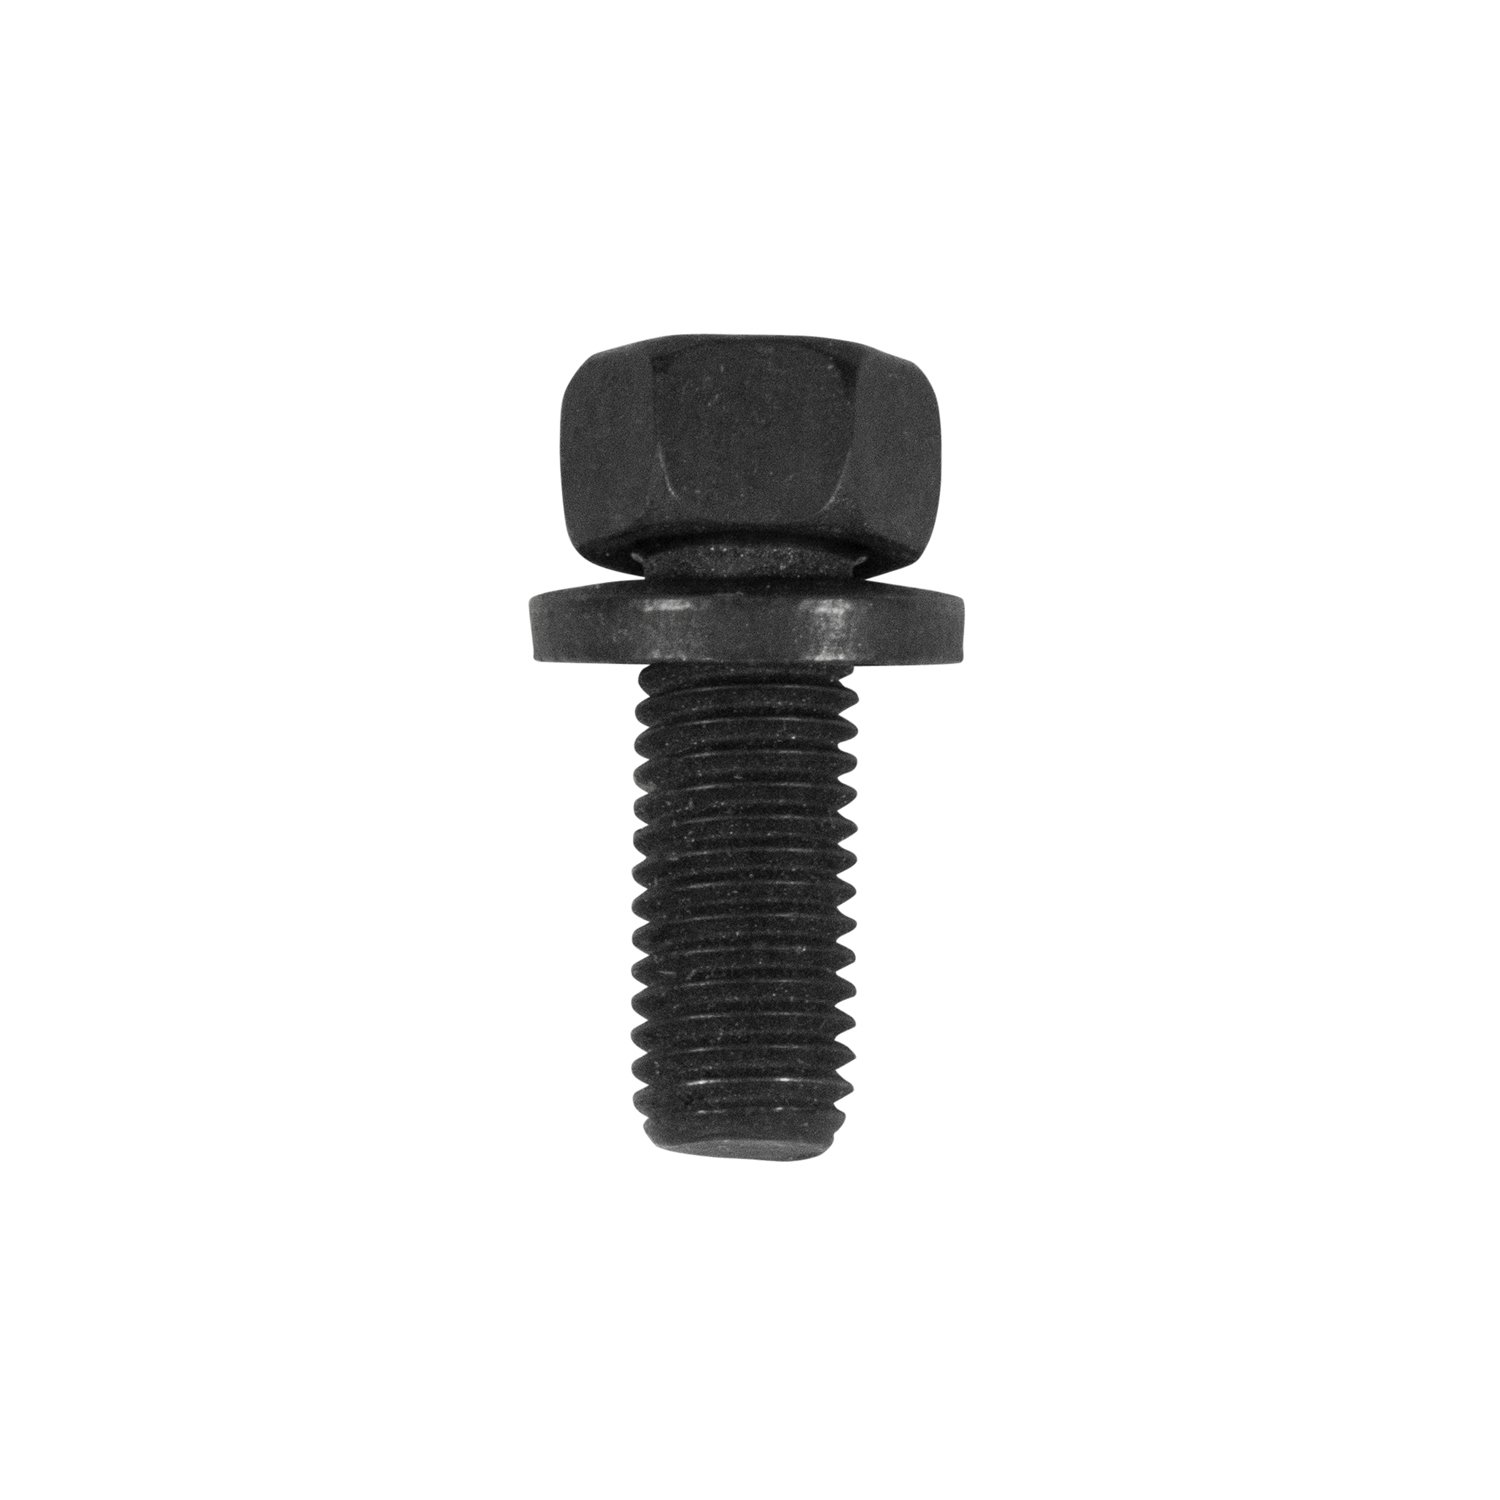 7290 U-Joint Strap Bolt (One Bolt Only) For Chrysler 7.25 in., 8.25 in., 8.75 in., 9.25 in.